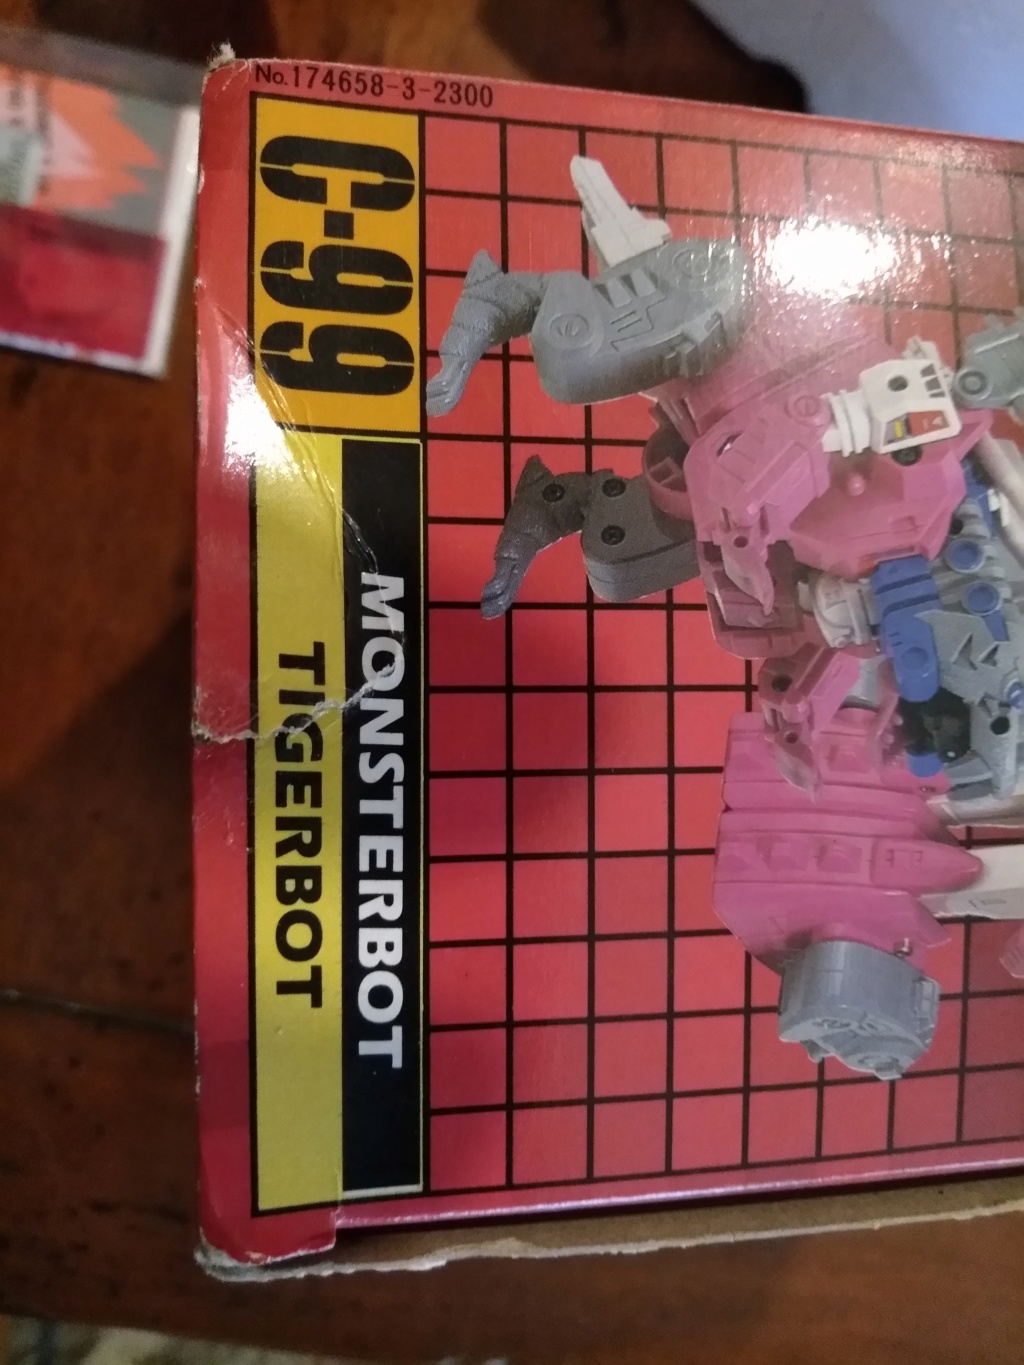 monsterbot tigerbot c-99 in box P_202044